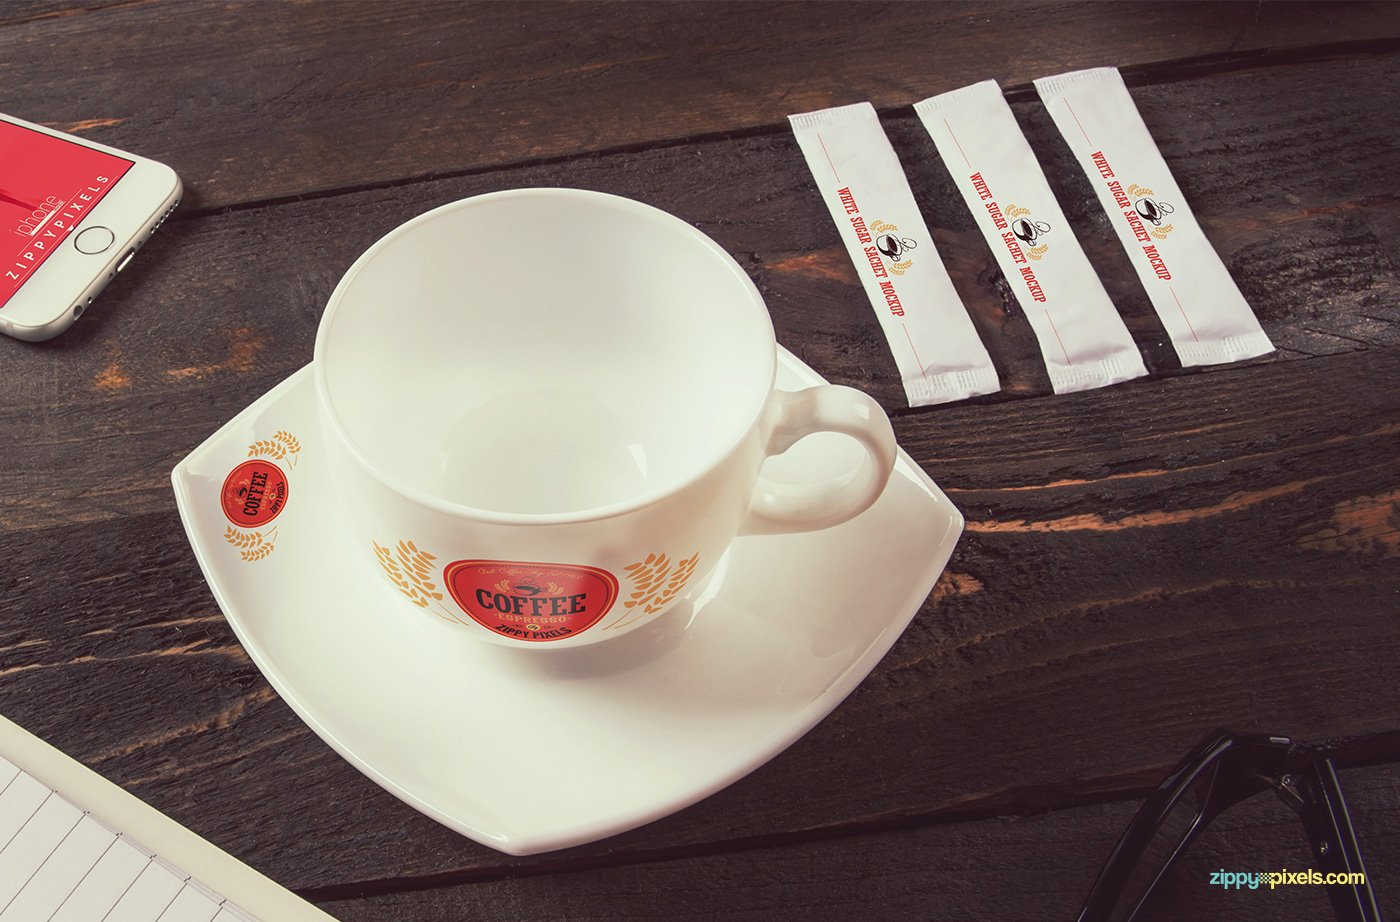 Simple white coffee cup with the small red logo.